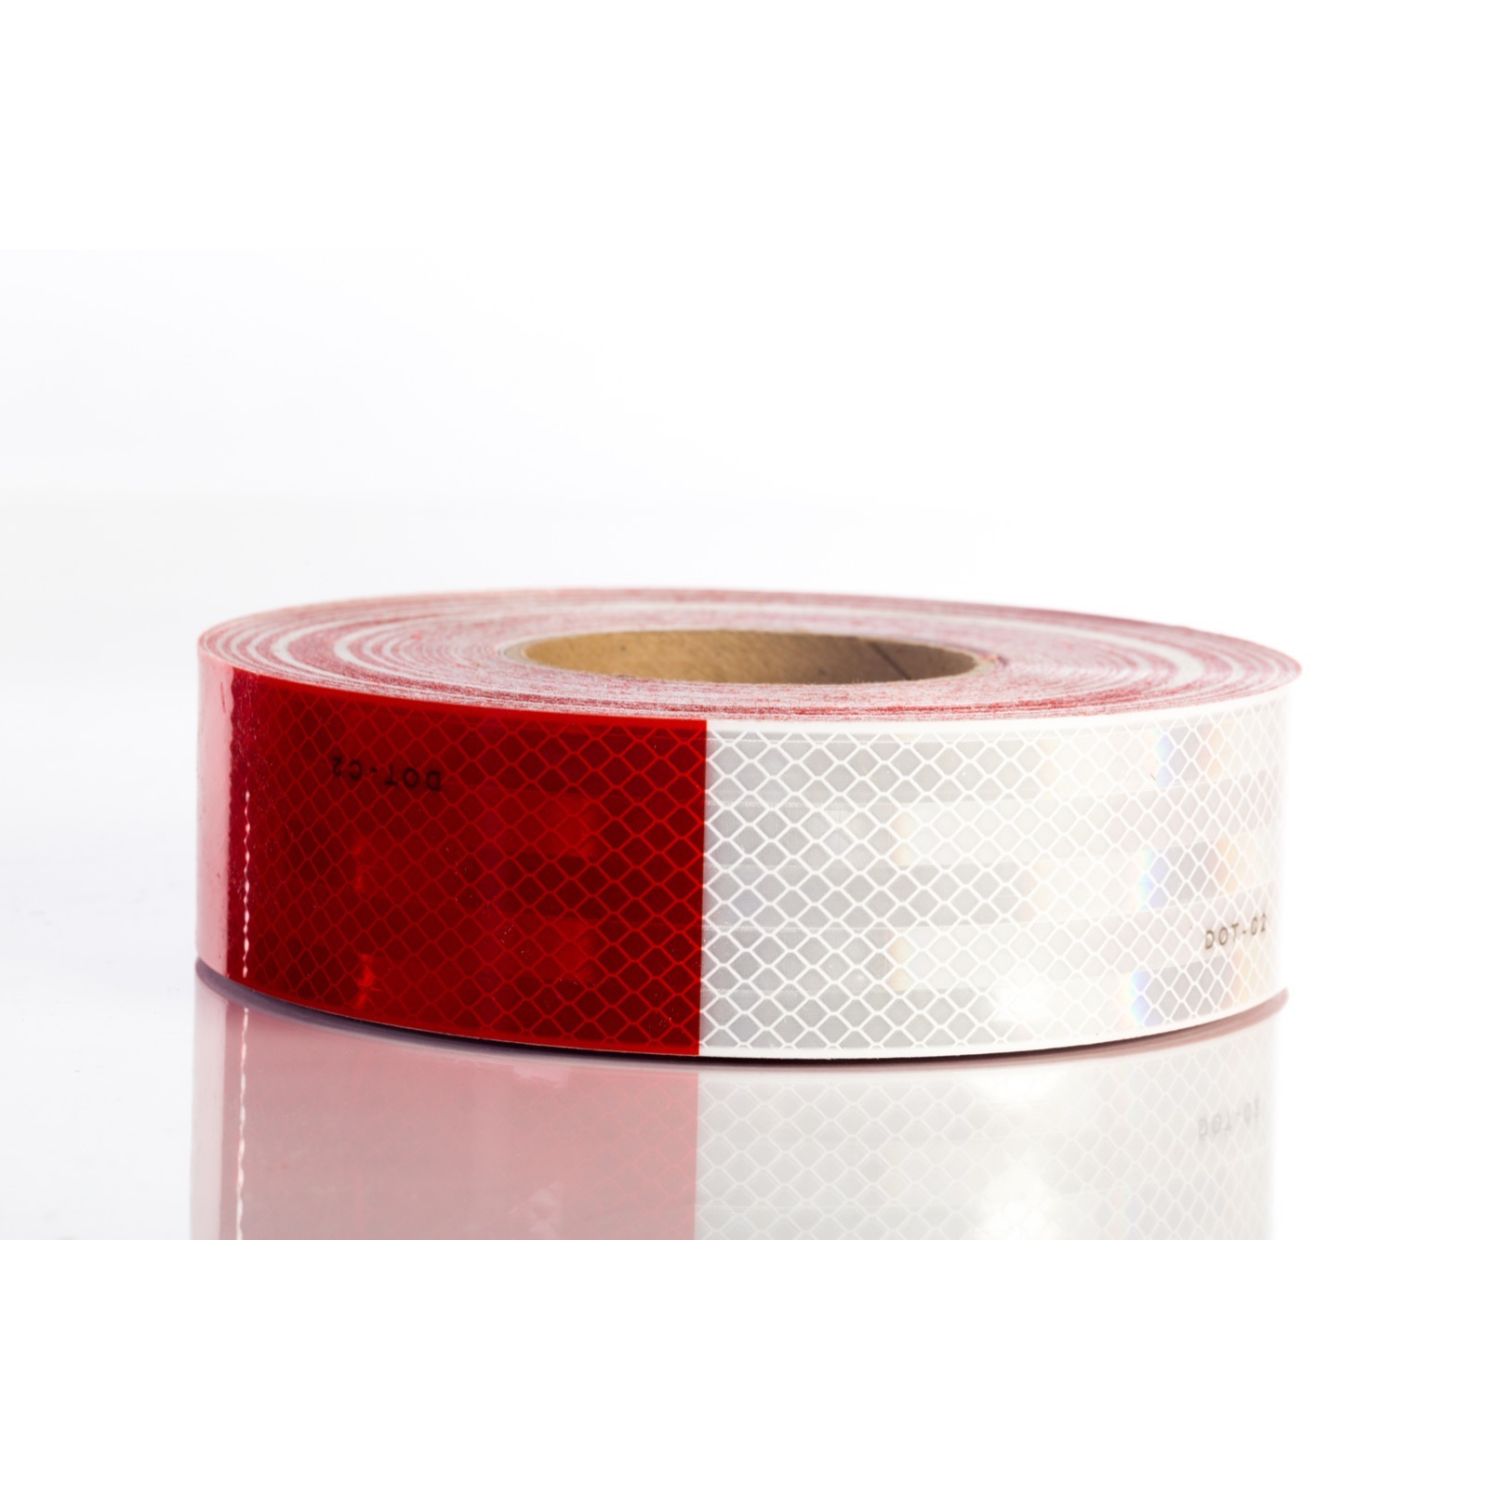 3M Diamond Grade Conspicuity Roadway Safety Tape 150'